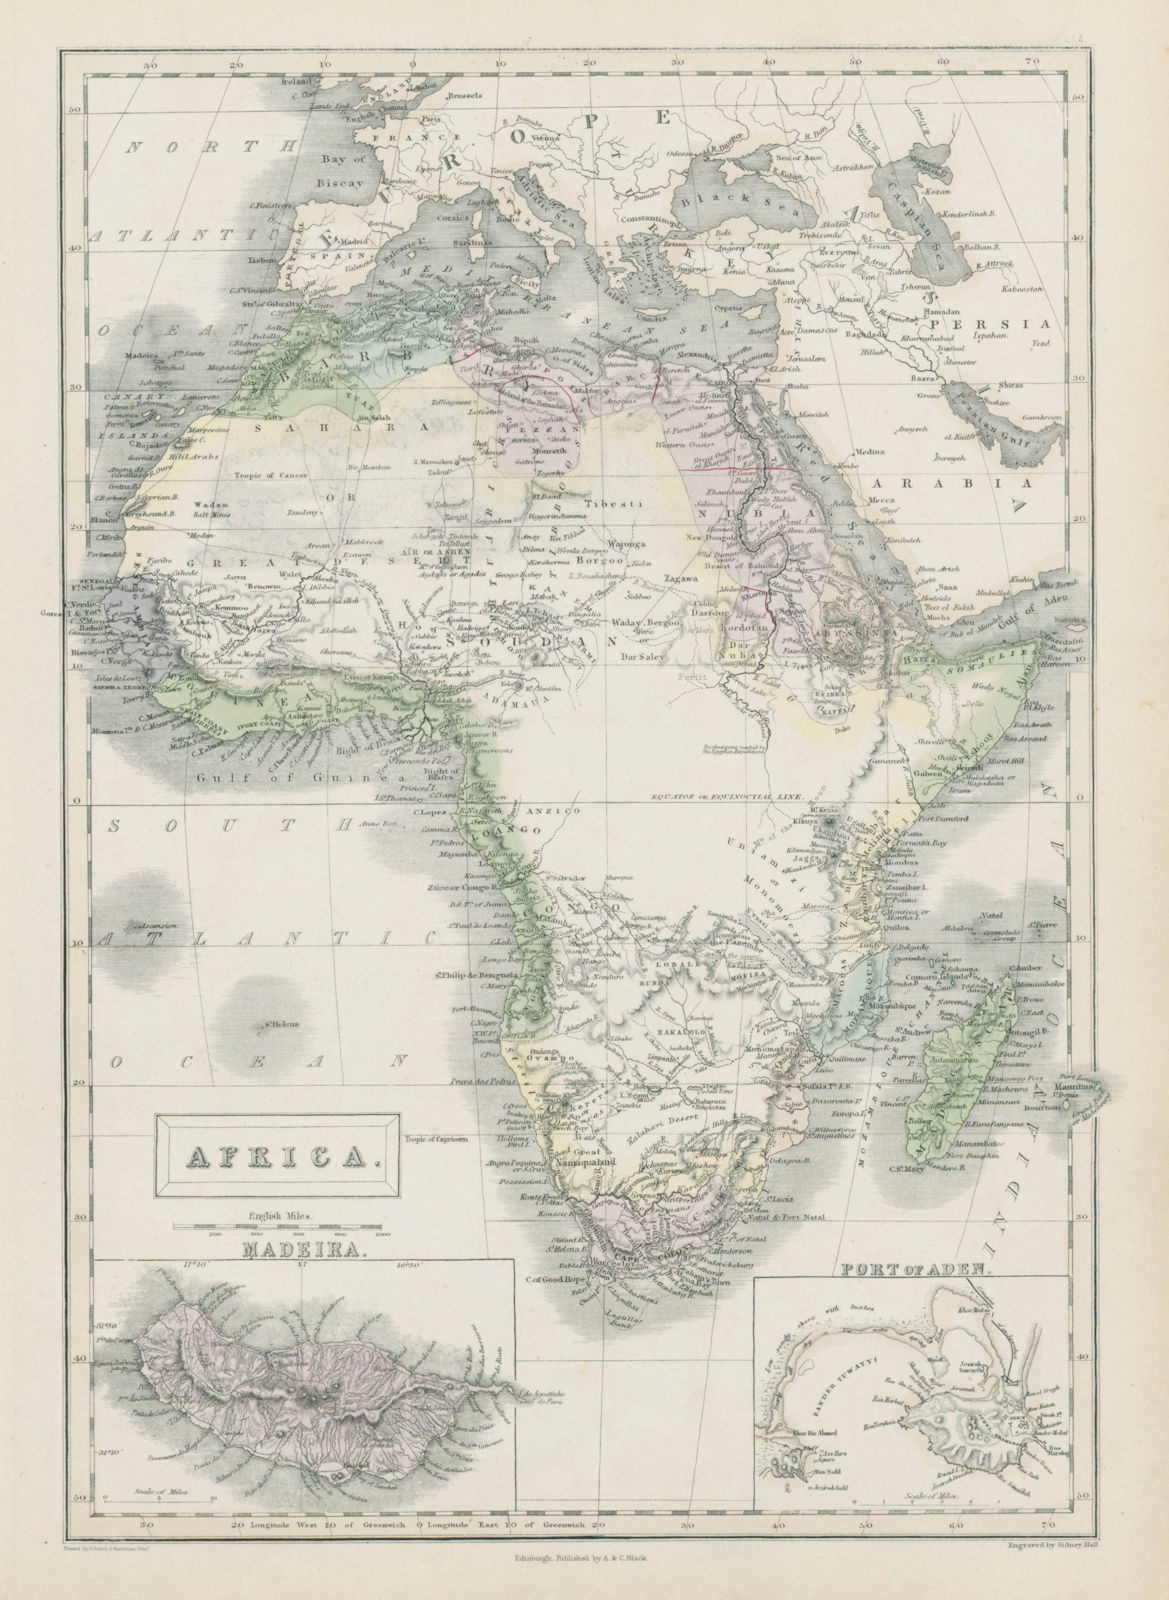 Associate Product Early colonial Africa. Inset Madeira & Aden. SIDNEY HALL 1856 old antique map